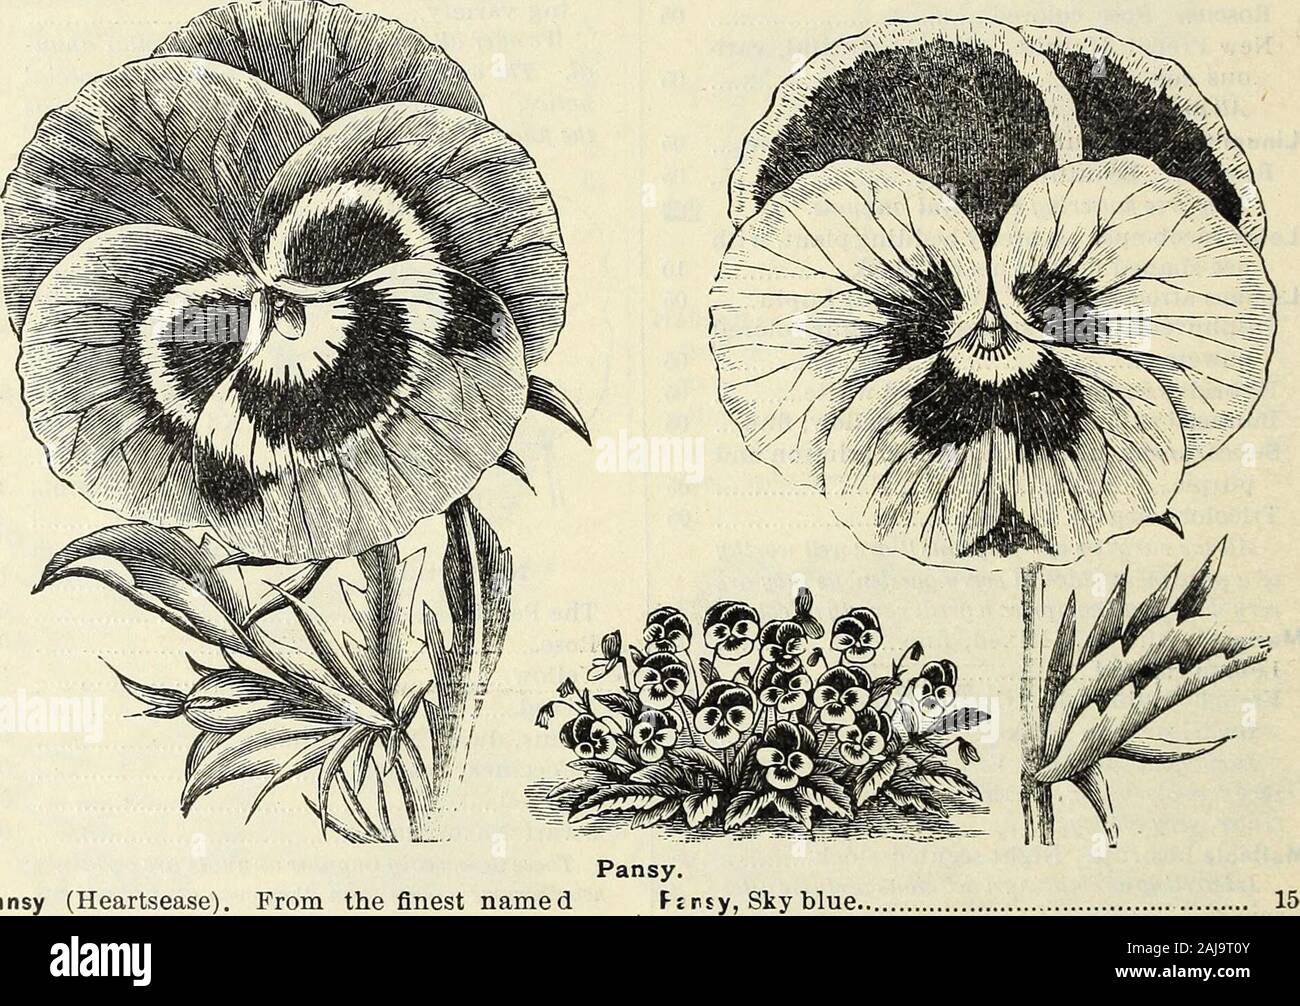 Spring catalogue of John Saul's new, rare and beautiful flower and garden seeds, &c 1885 . Petunia. Per pkt. Petunia. Center purple, striped, extra fine 25 Comtesse of Ellesmere 10 Large flowering. Crimson and purple 25 Purplish red 25 Striped (splendid) 25 Extra fine. Mixed varieties 10 Mixed varieties 05 Prof use flowering, beautiful andutefid as bed-ding plants.. Pansy (Heartsease). From the finest namedflowers, imported New striped and blotched. Very showy Faust, King of the Blacks. The darkest incultivation Copper colored Violet. White edged White. Pure white Pure yellow Purple and yellow Stock Photo